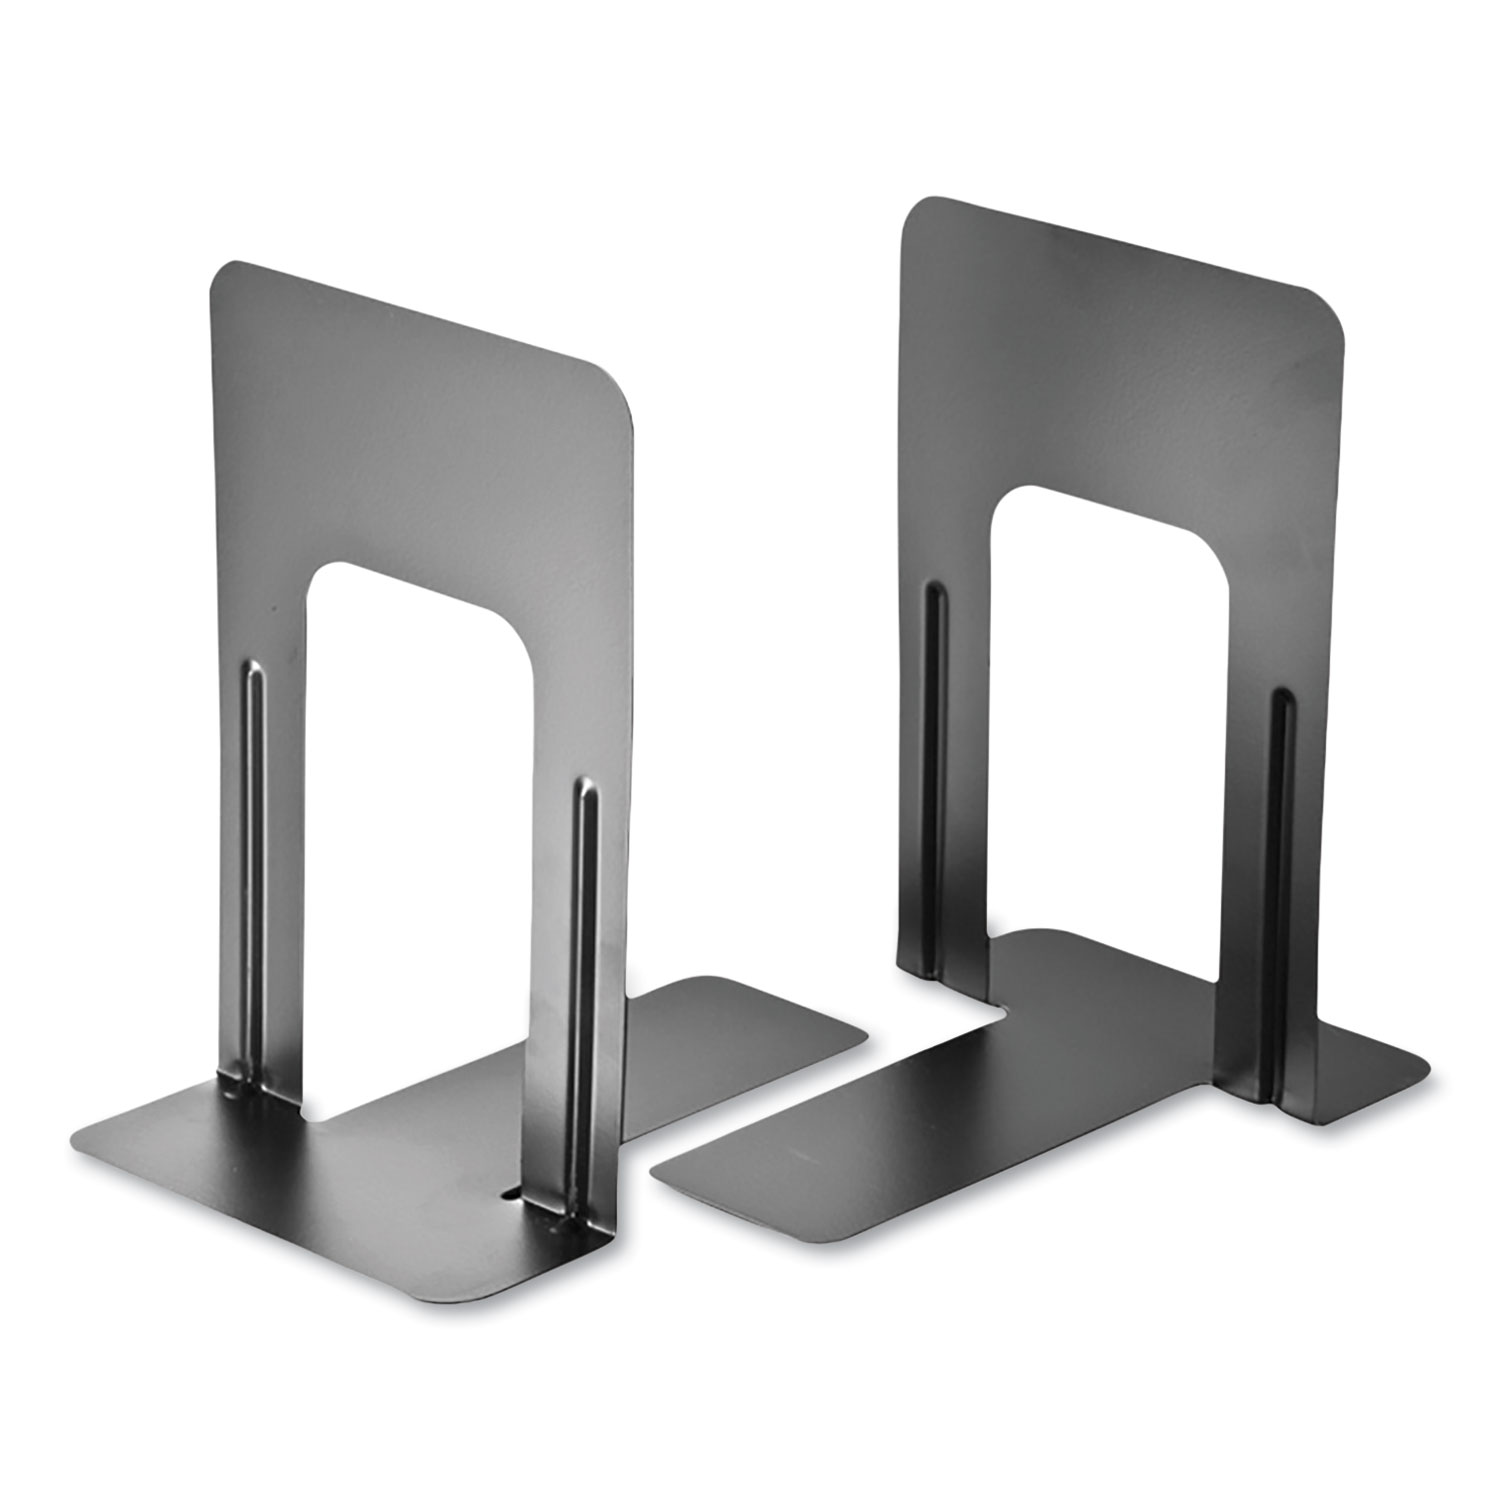  Officemate OIC93051 Steel Bookends, Nonskid, 5.88 x 8.25 x 9, Black (OIC24451751) 